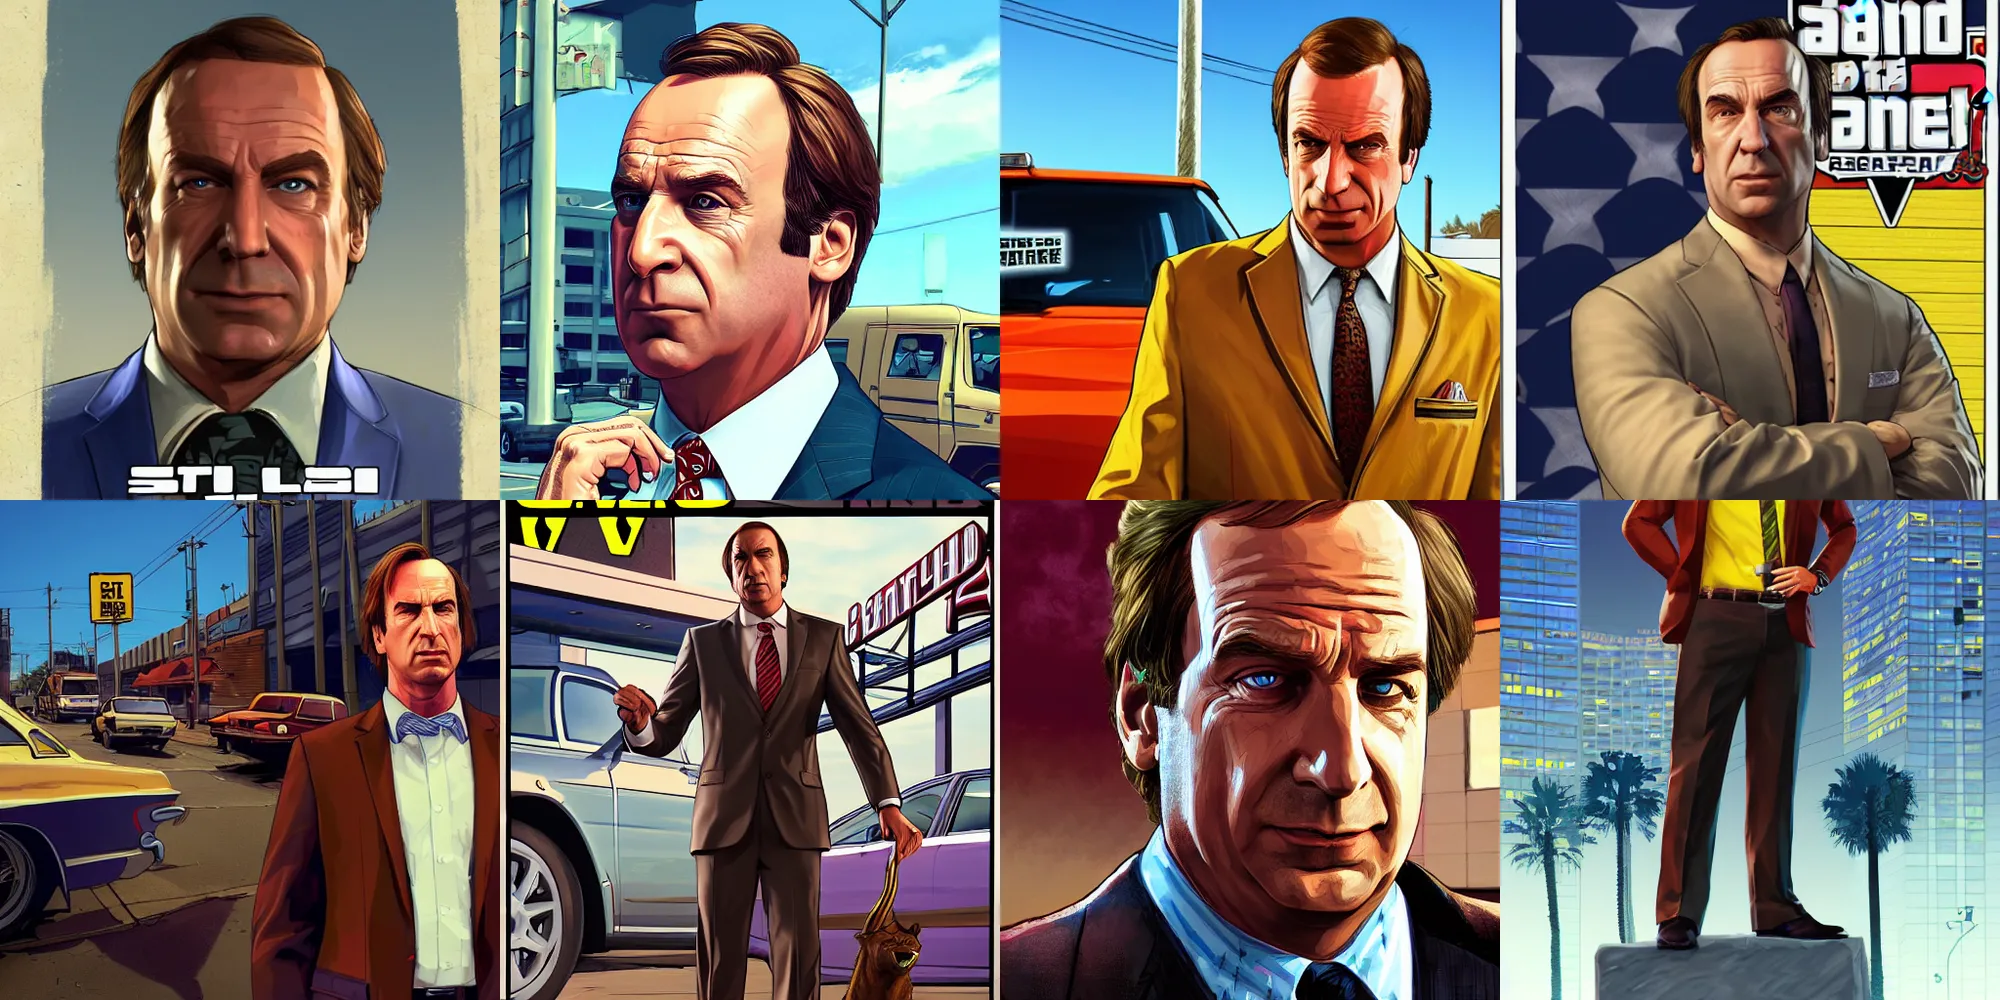 Prompt: a detailed artwork saul goodman in gta v, cover art by stephen bliss, artstation, no text, loading screen